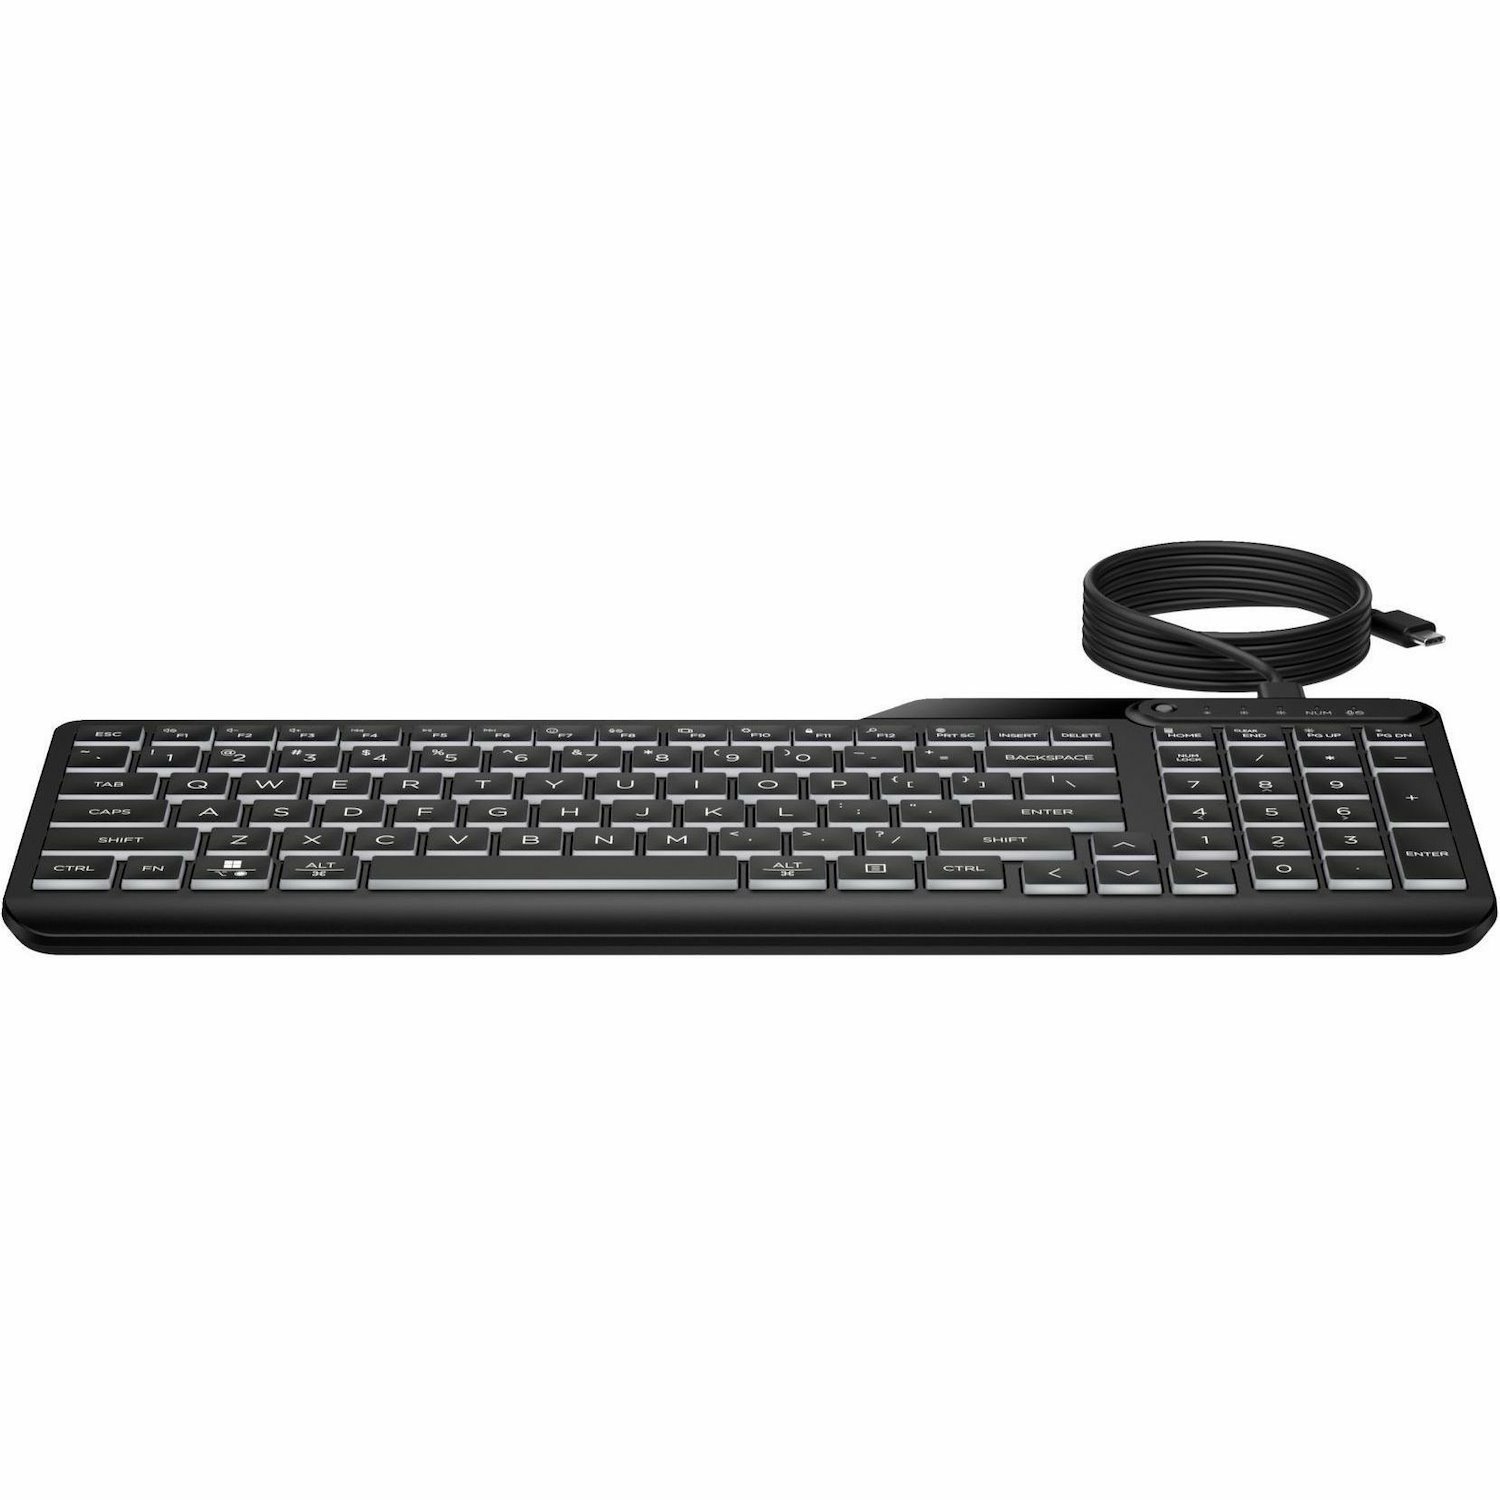 HP 405 Keyboard - Cable Connectivity - USB Type A Interface - LED - Black